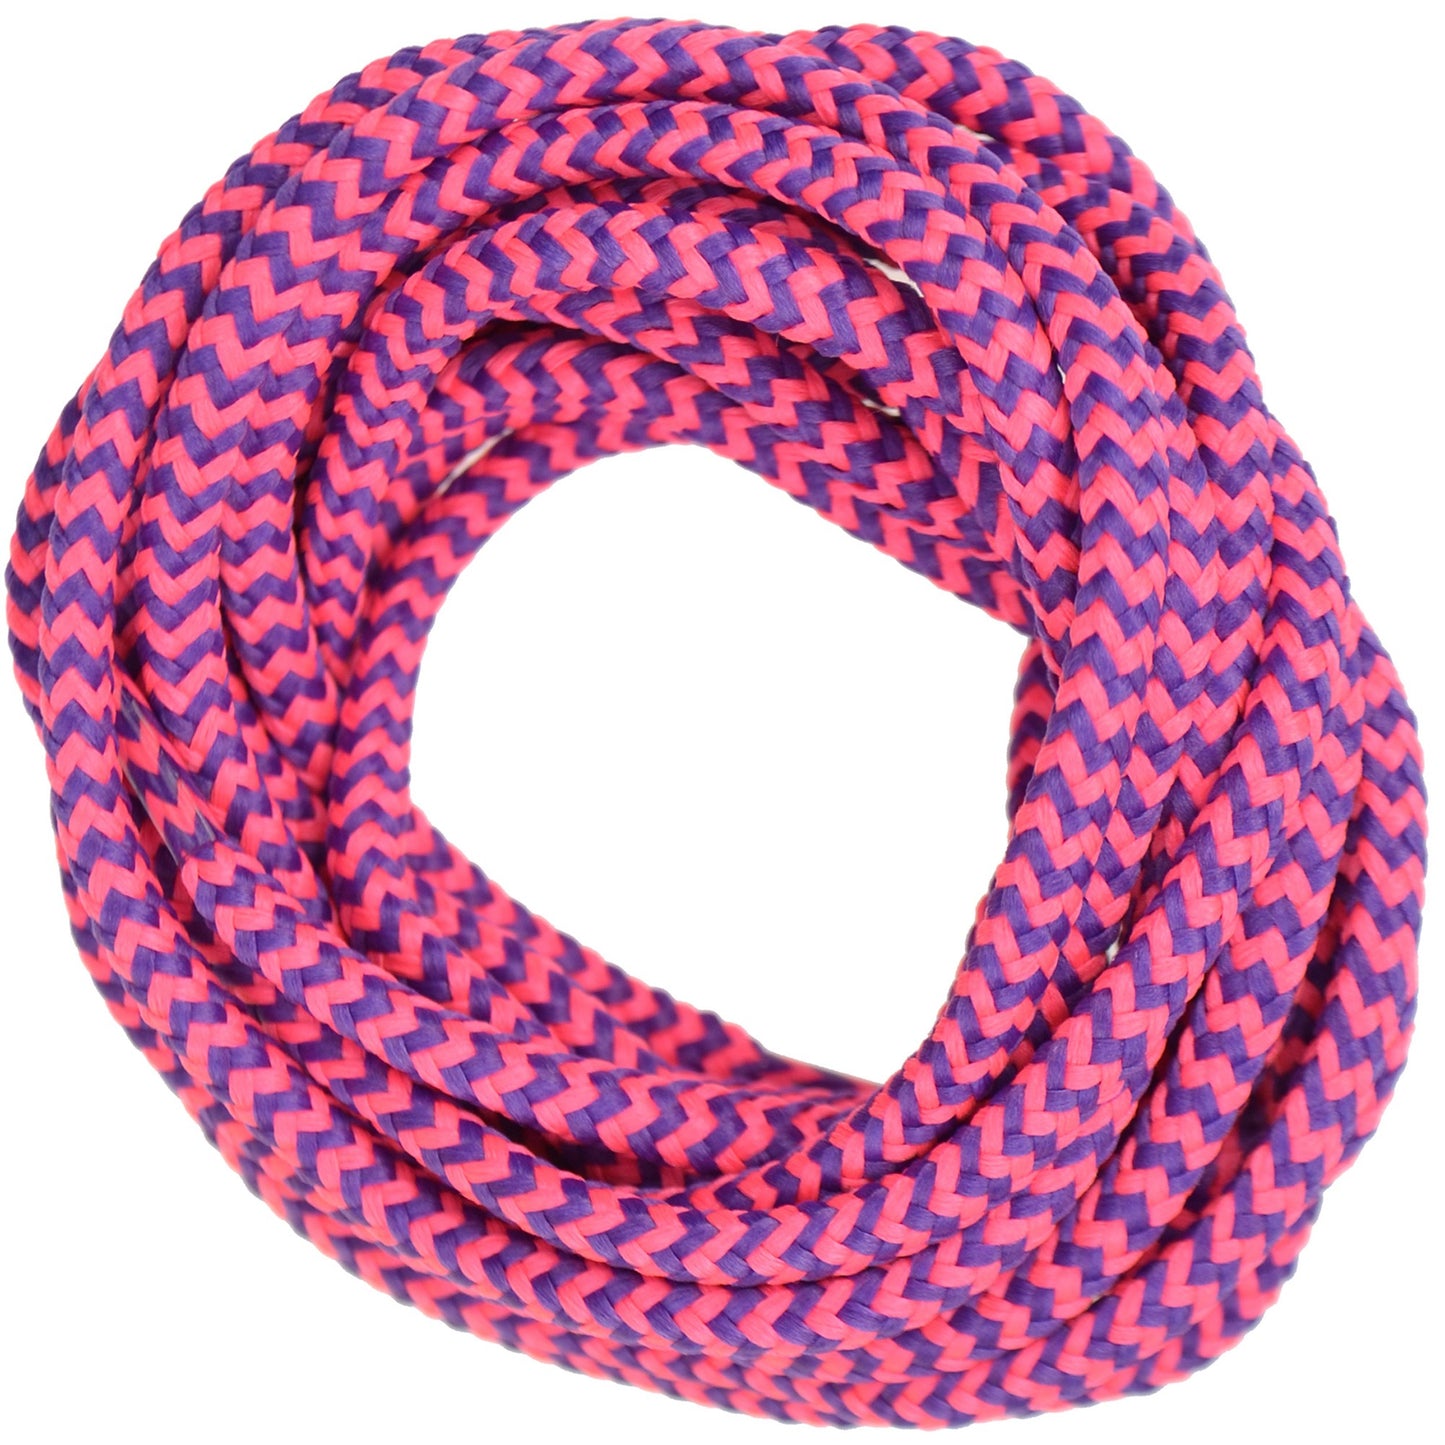 150cm Pink & Purple dog-tooth walking boot Shoe Laces